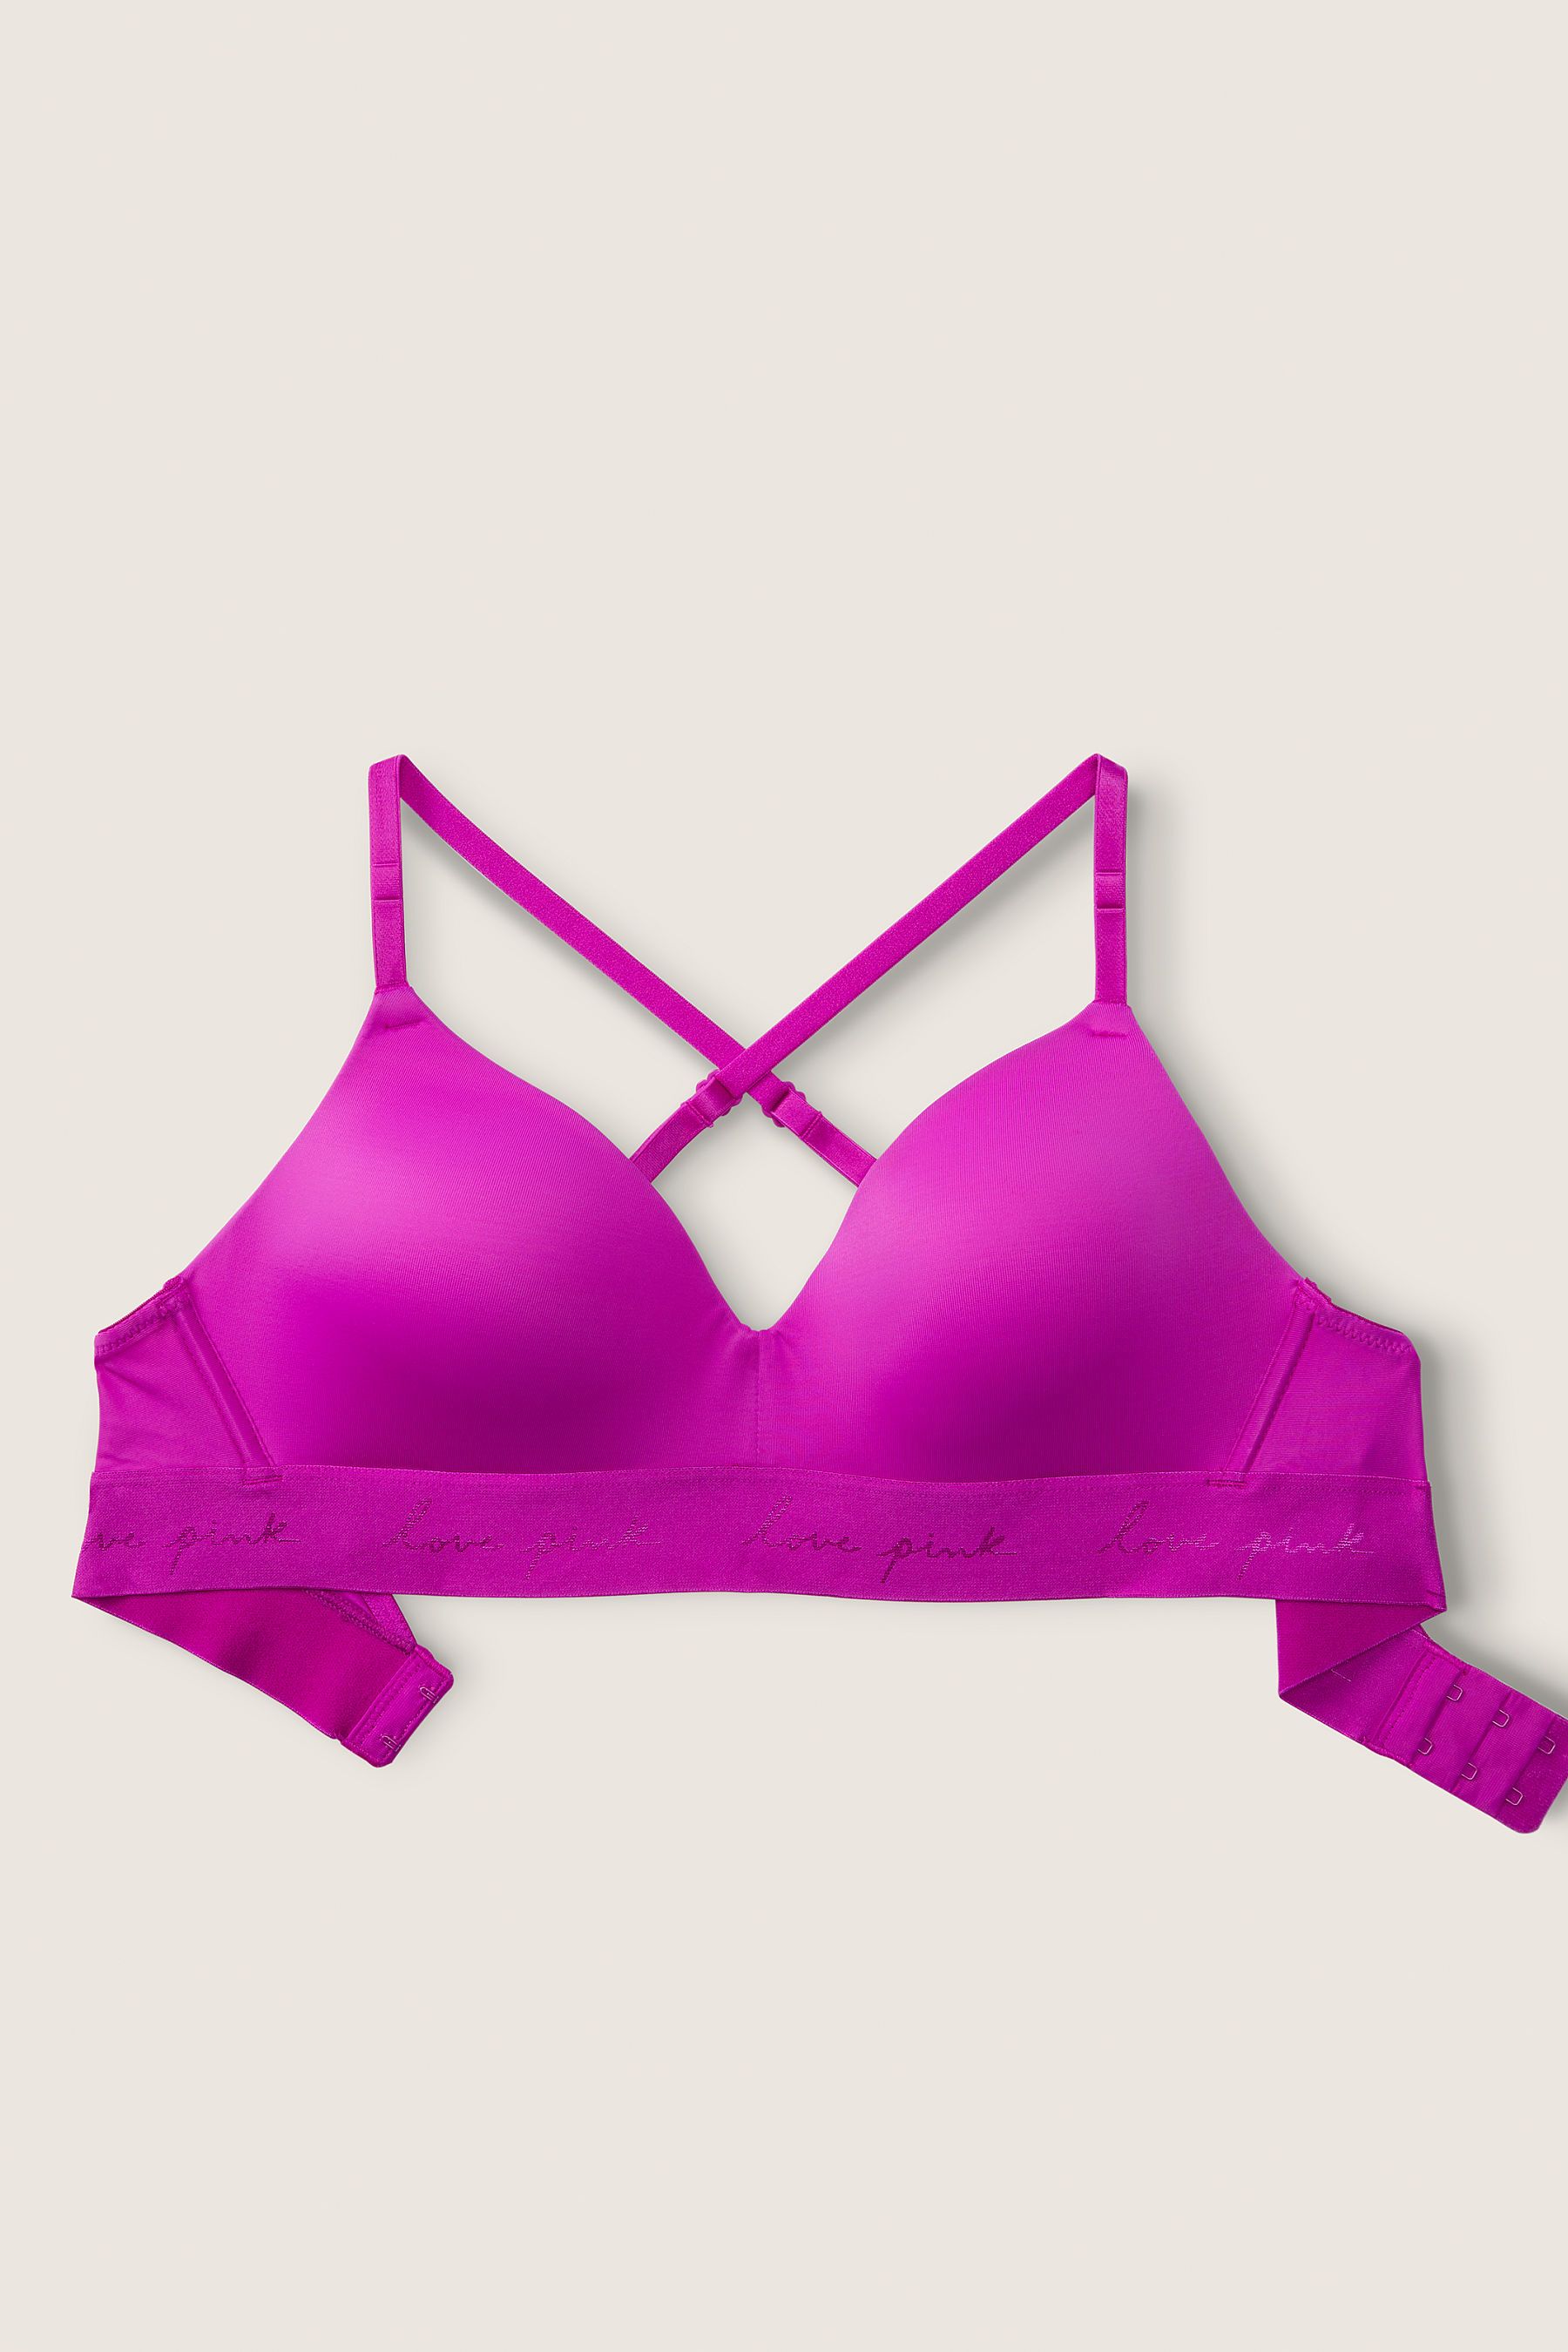 Buy Victoria's Secret PINK Smooth T-Shirt Bra from the Victoria's ...